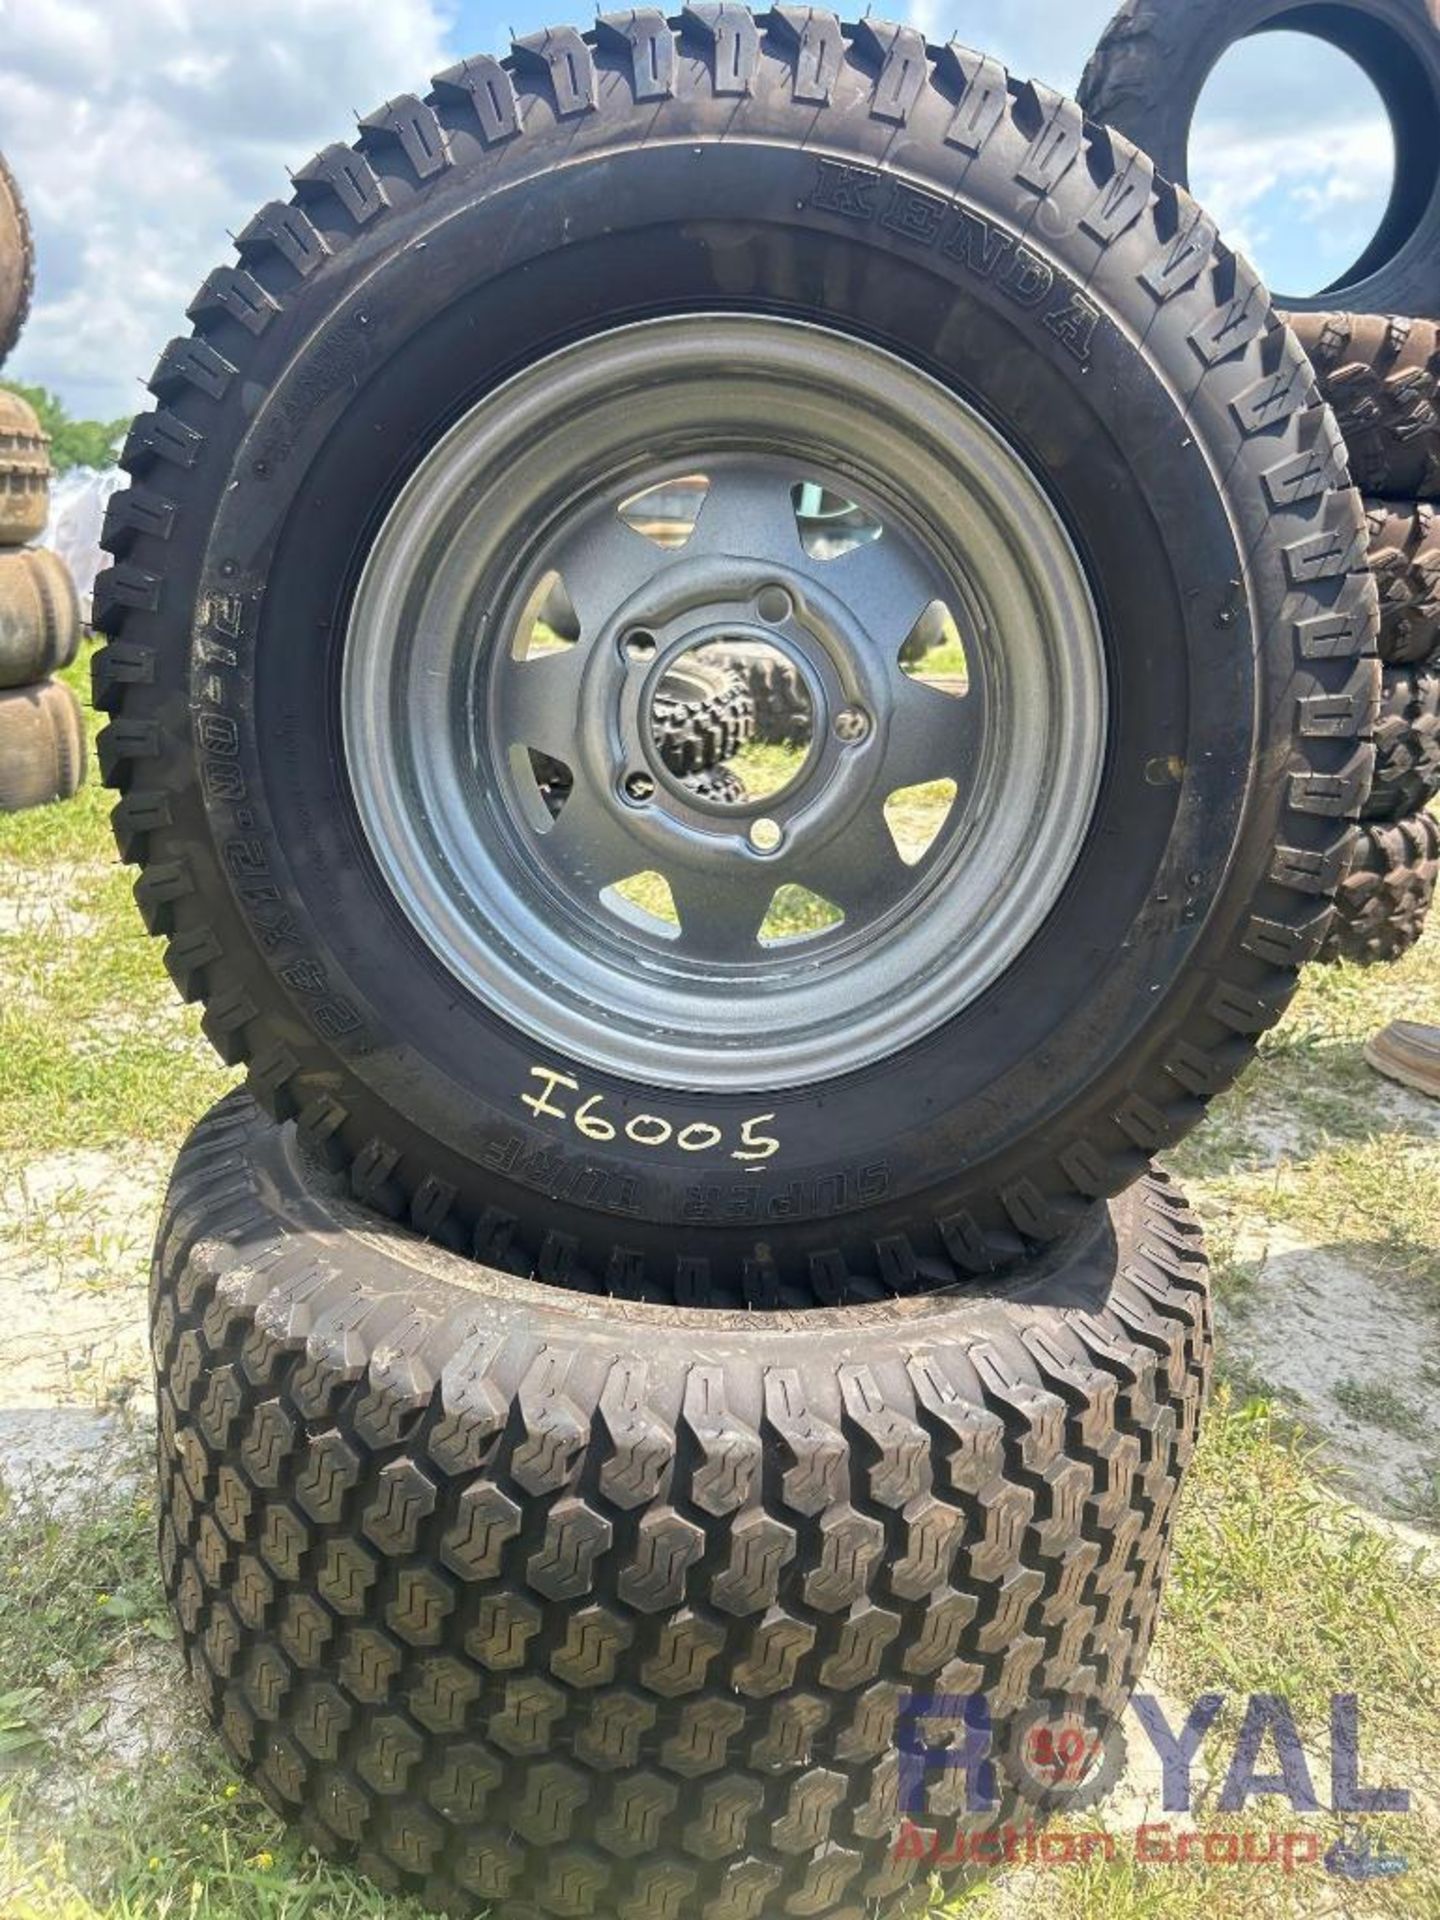 Lot of 2 Unused Wheels and Tires 24x12-12 - Image 3 of 3